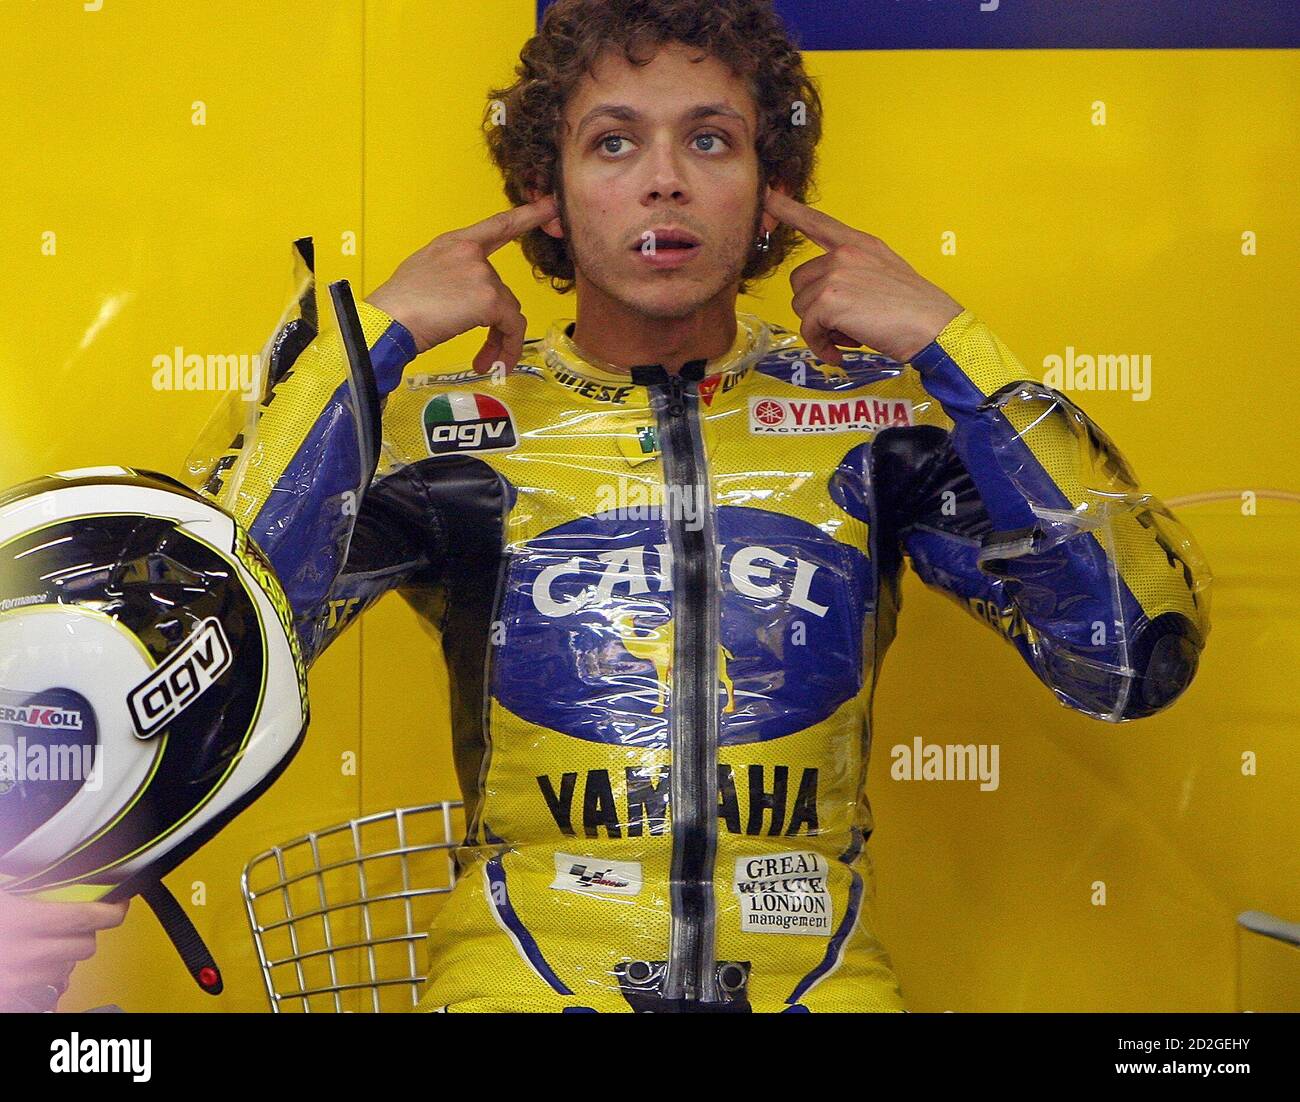 MotoGP world champion Valentino Rossi of Italy sets his ears plugs before  the beginning of the second free practice session for the 2006 China MotoGP  in Shanghai May 12, 2006. The race